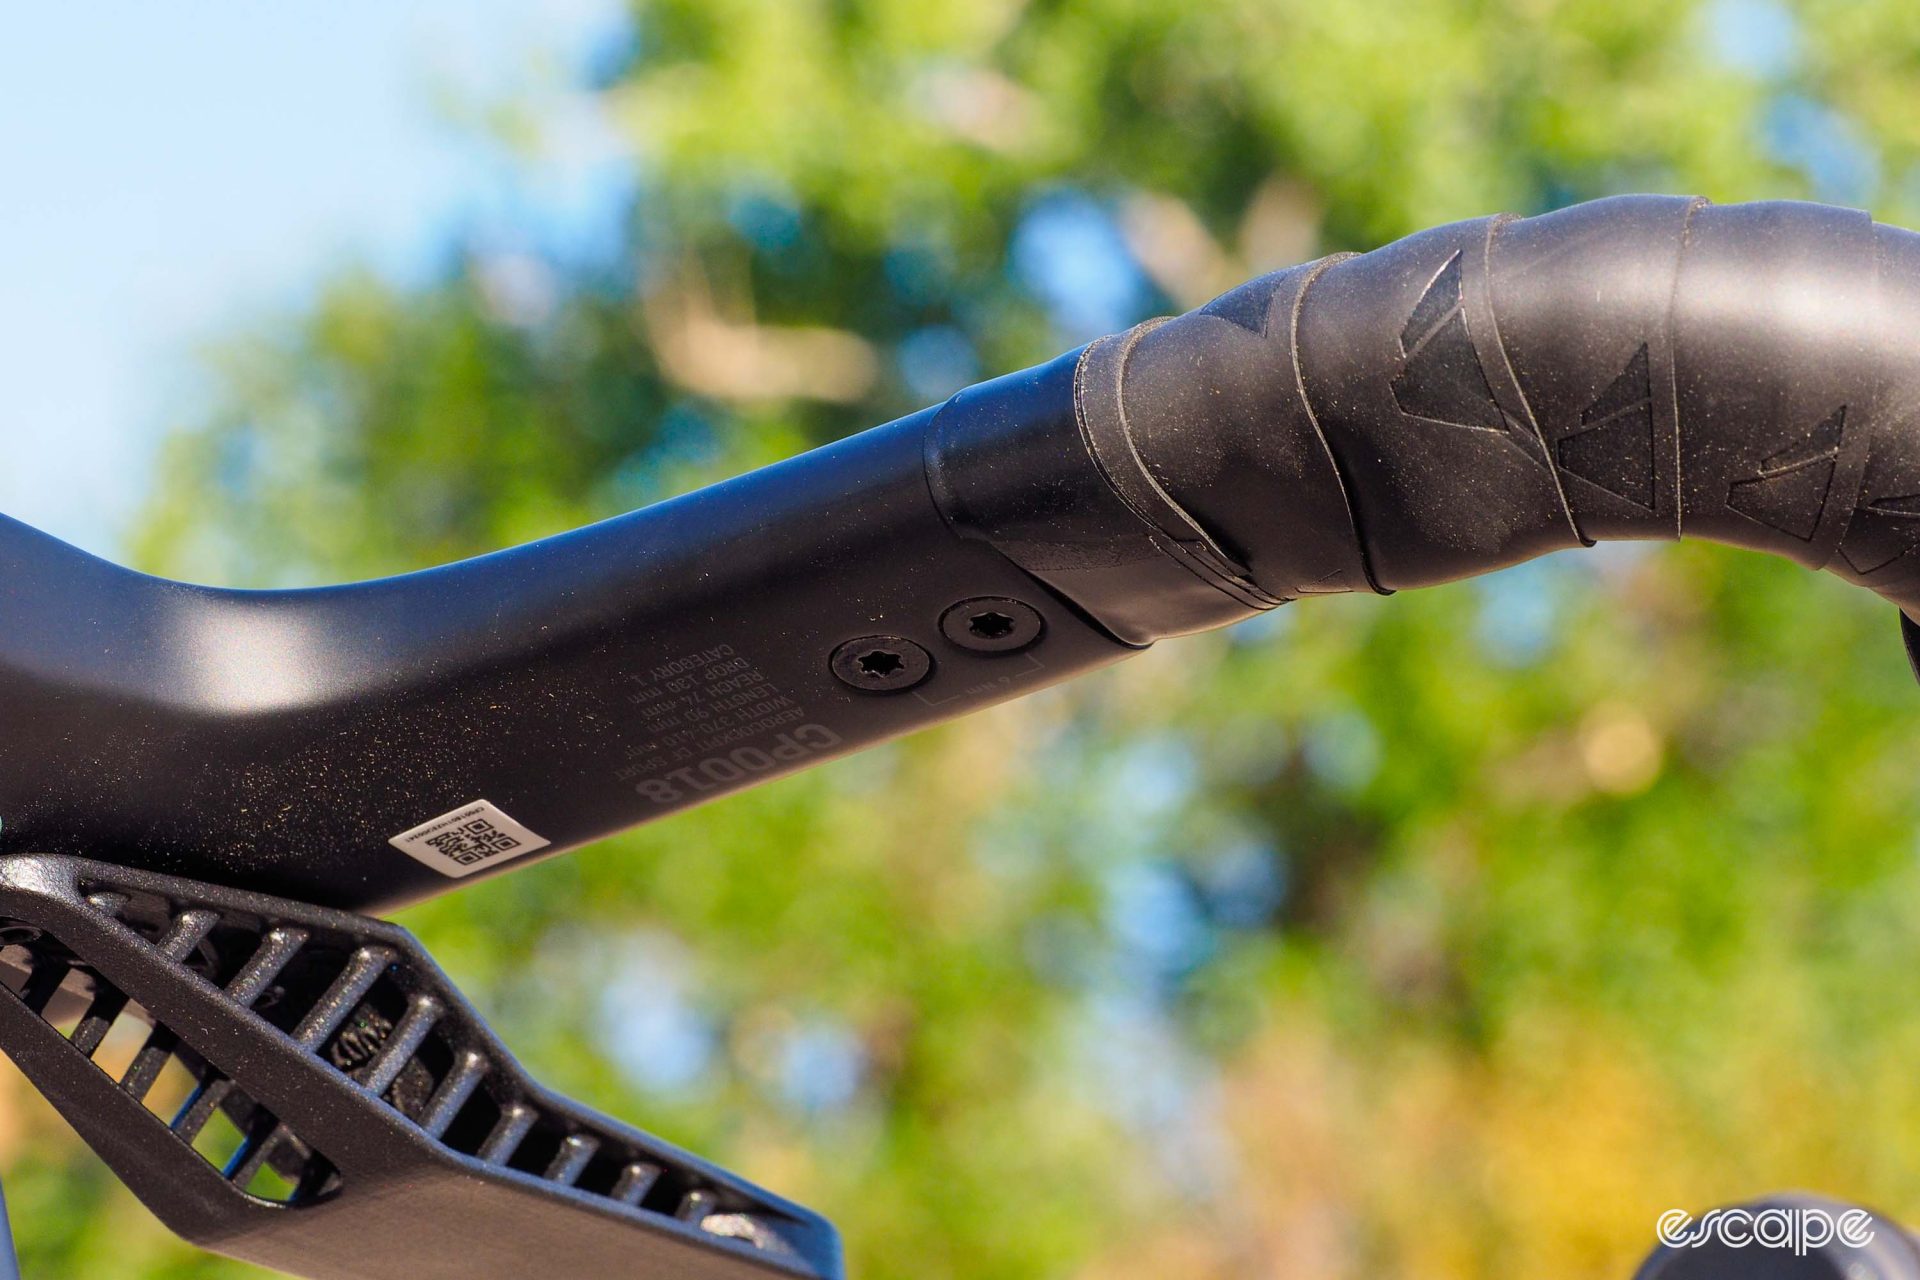 The Canyon CP0018 Aerocockpit features an adjustable-width bar, accessed from two Torx-head bolts flush to the underside right where the bar tape ends.